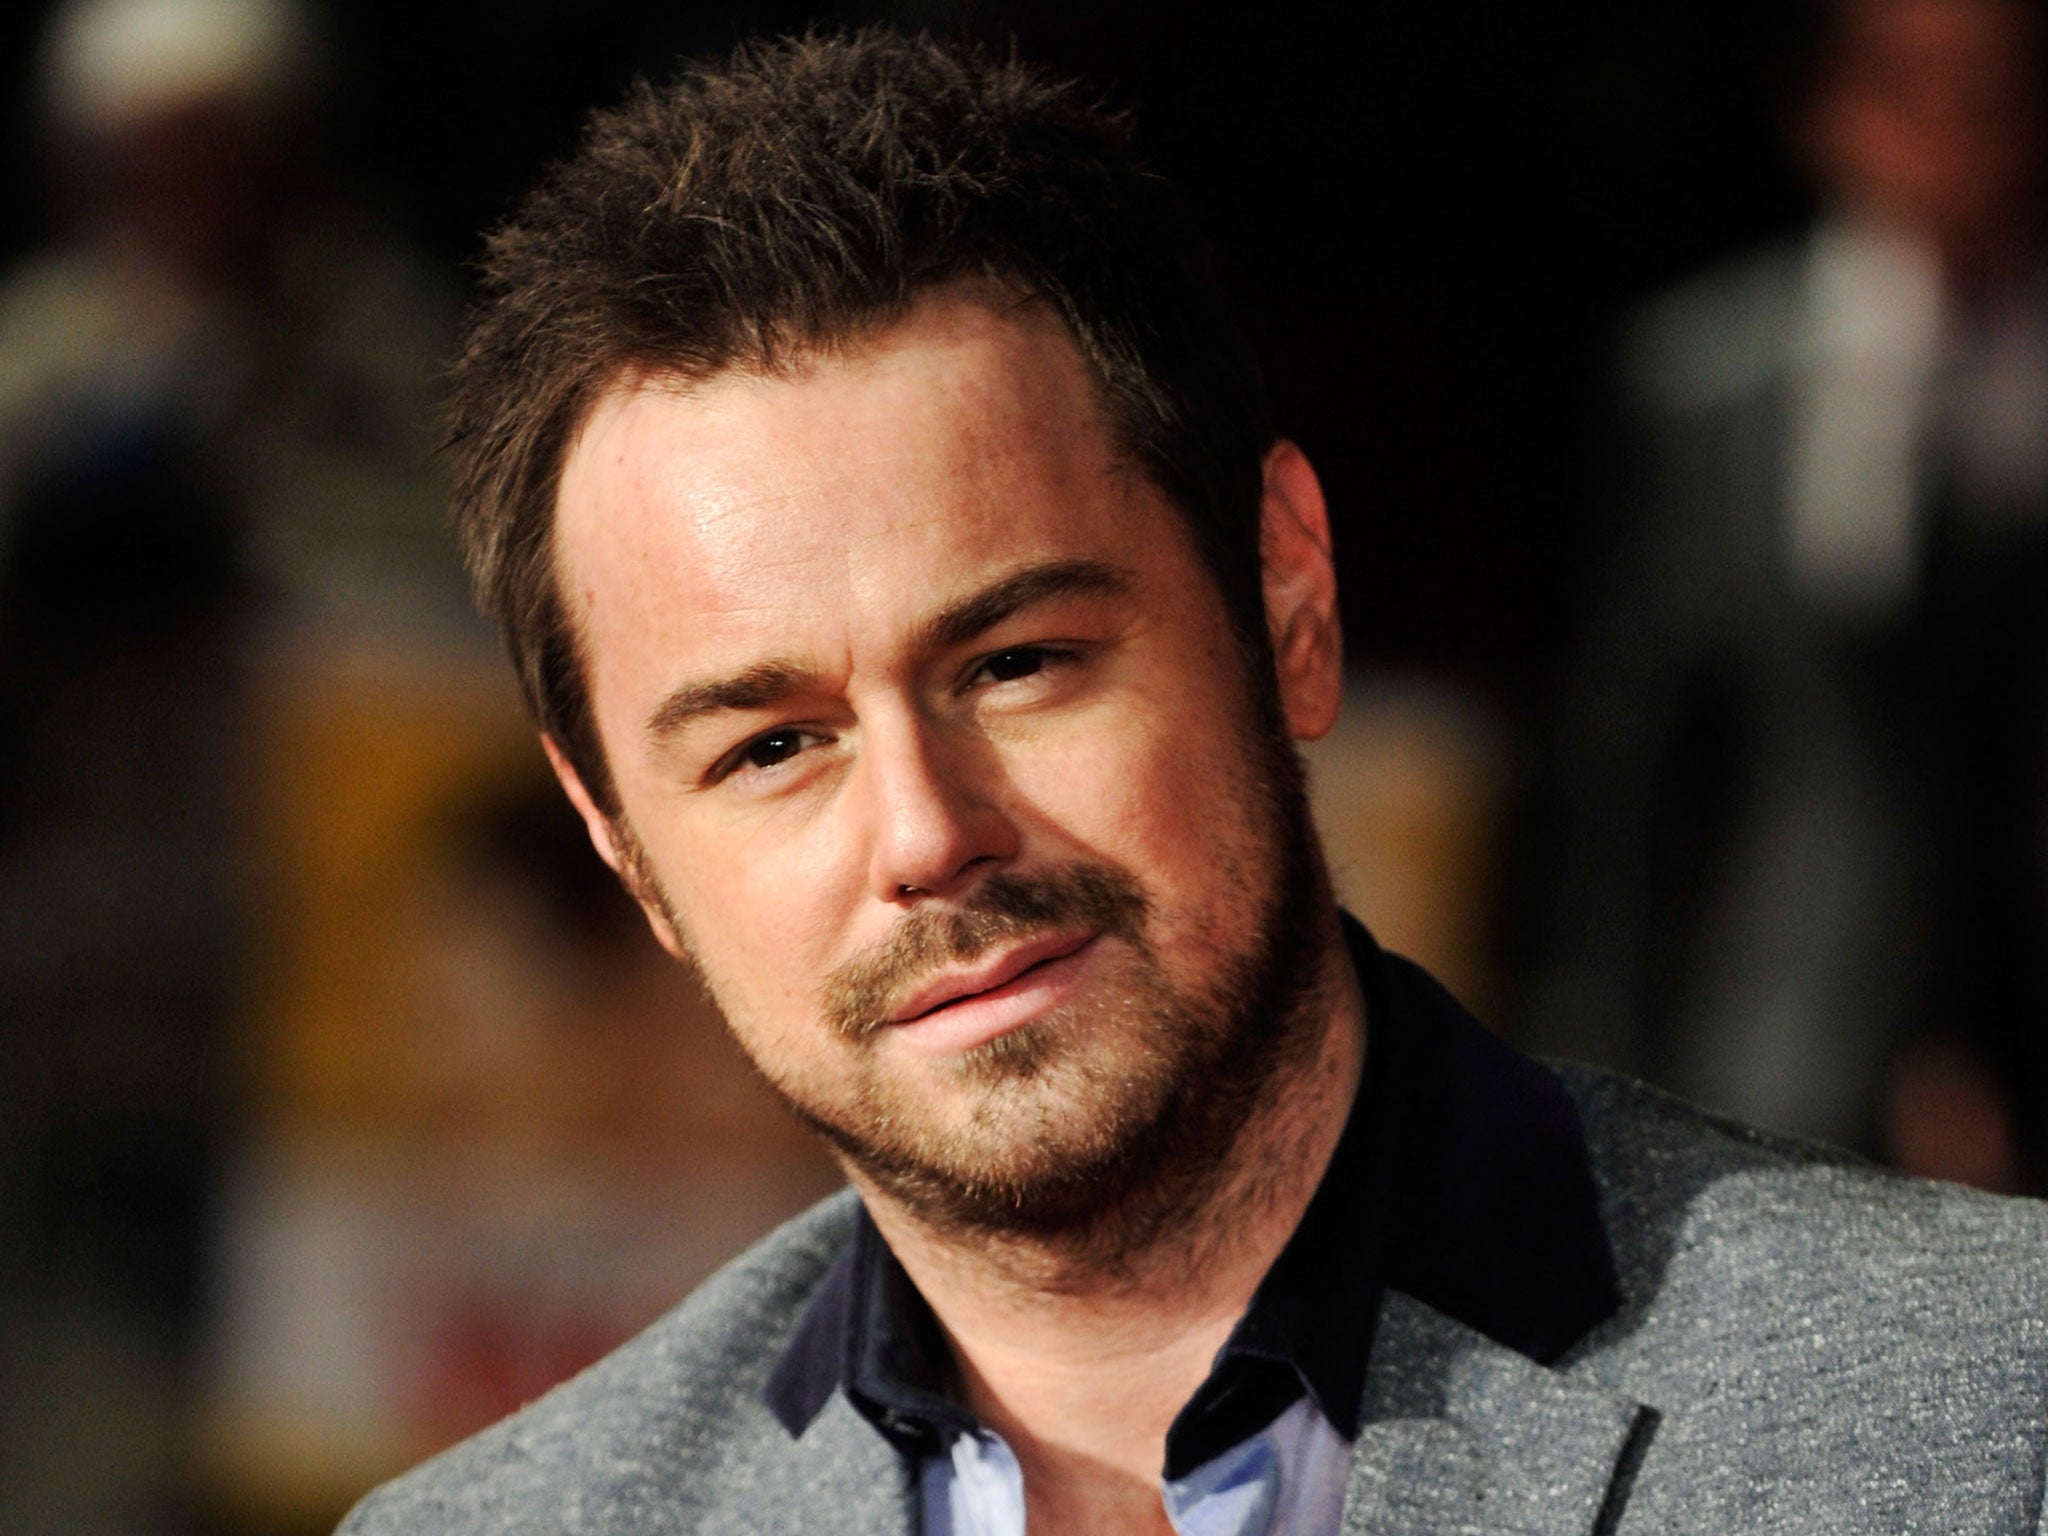 EastEnders actor Danny Dyer has been rejected from Game of Thrones three times